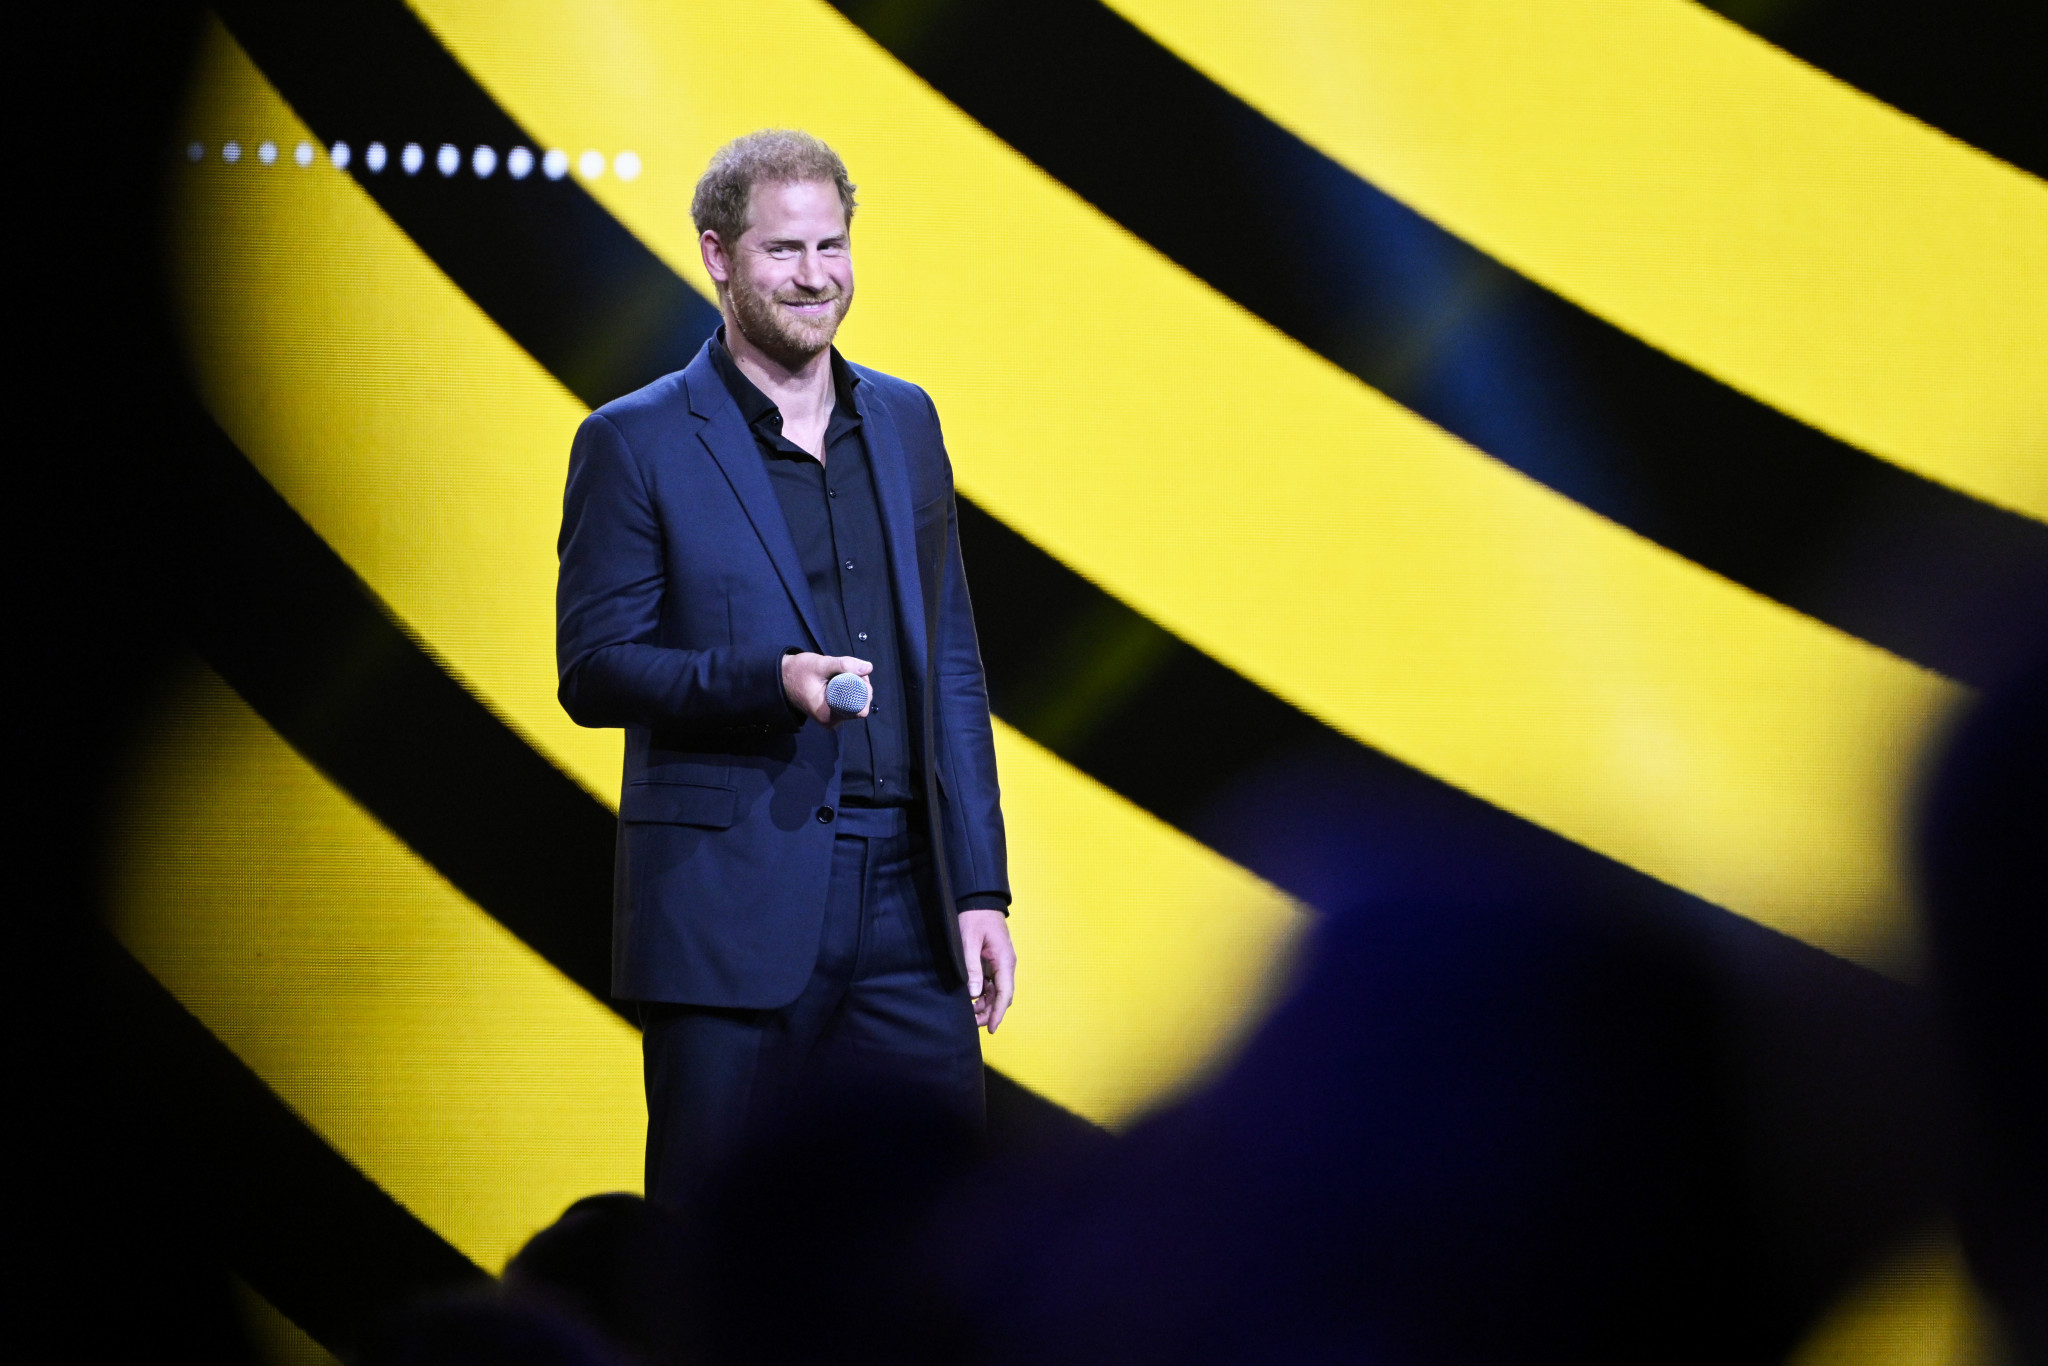 Prince Harry addresses competitors at the Closing Ceremony of the sixth Invictus Games in Düsseldorf ©Getty Images